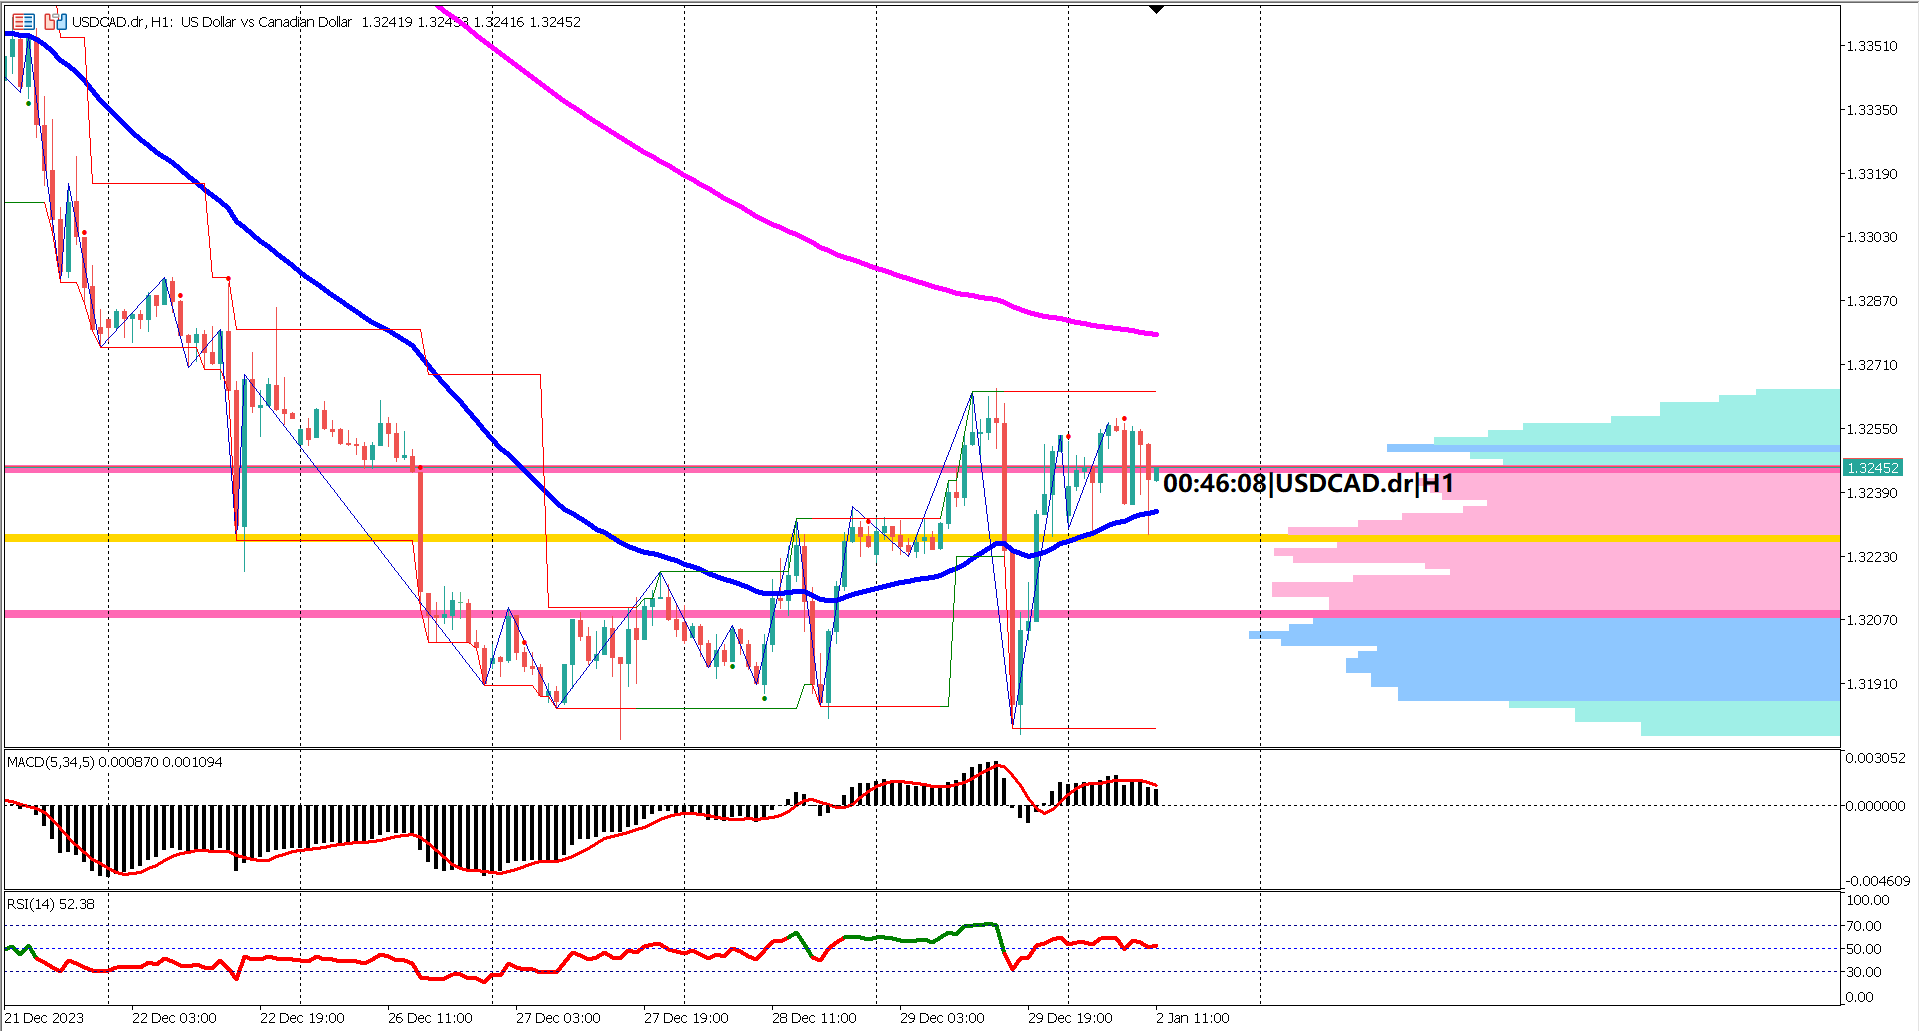 USDCAD Enters Consolidation Phase: Awaiting Macro Catalysts